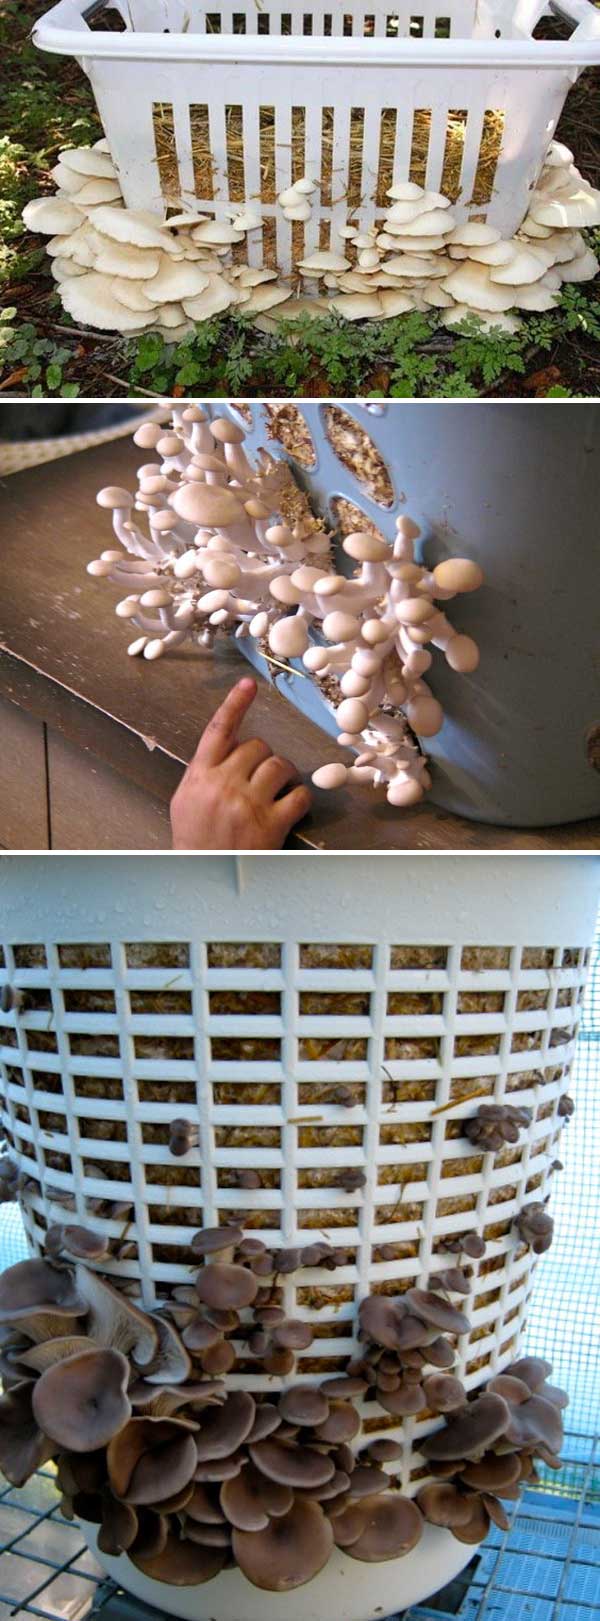 Grow Mushrooms in a Laundry Basket